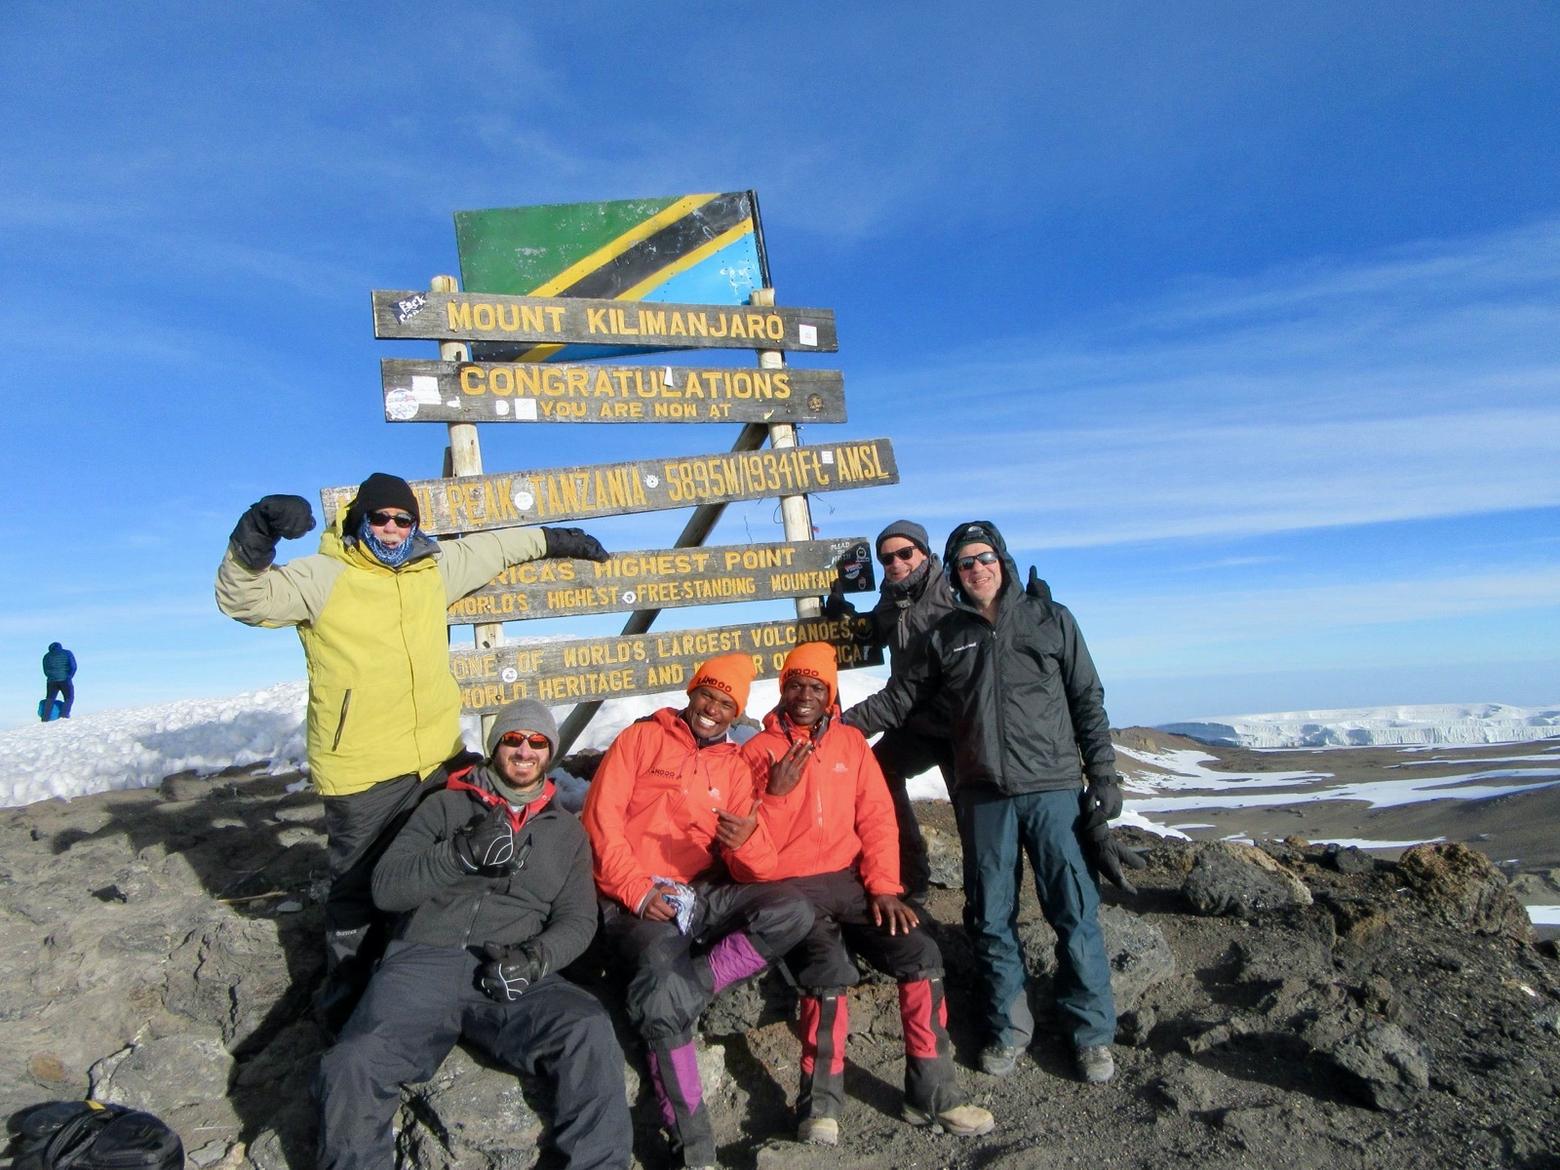 Only months ago, the author (in yellow jacket) and friends stood on the top of Mt. Kilimanjaro in Tanzania, at 19,341 feet the tallest summit in Africa.  Like the still wildlife-rich Serengeti Plain, Knight says the diversity of wildlife in Greater Yellowstone, his home region, is a miracle that needs safeguarding. Photo courtesy Phil Knight